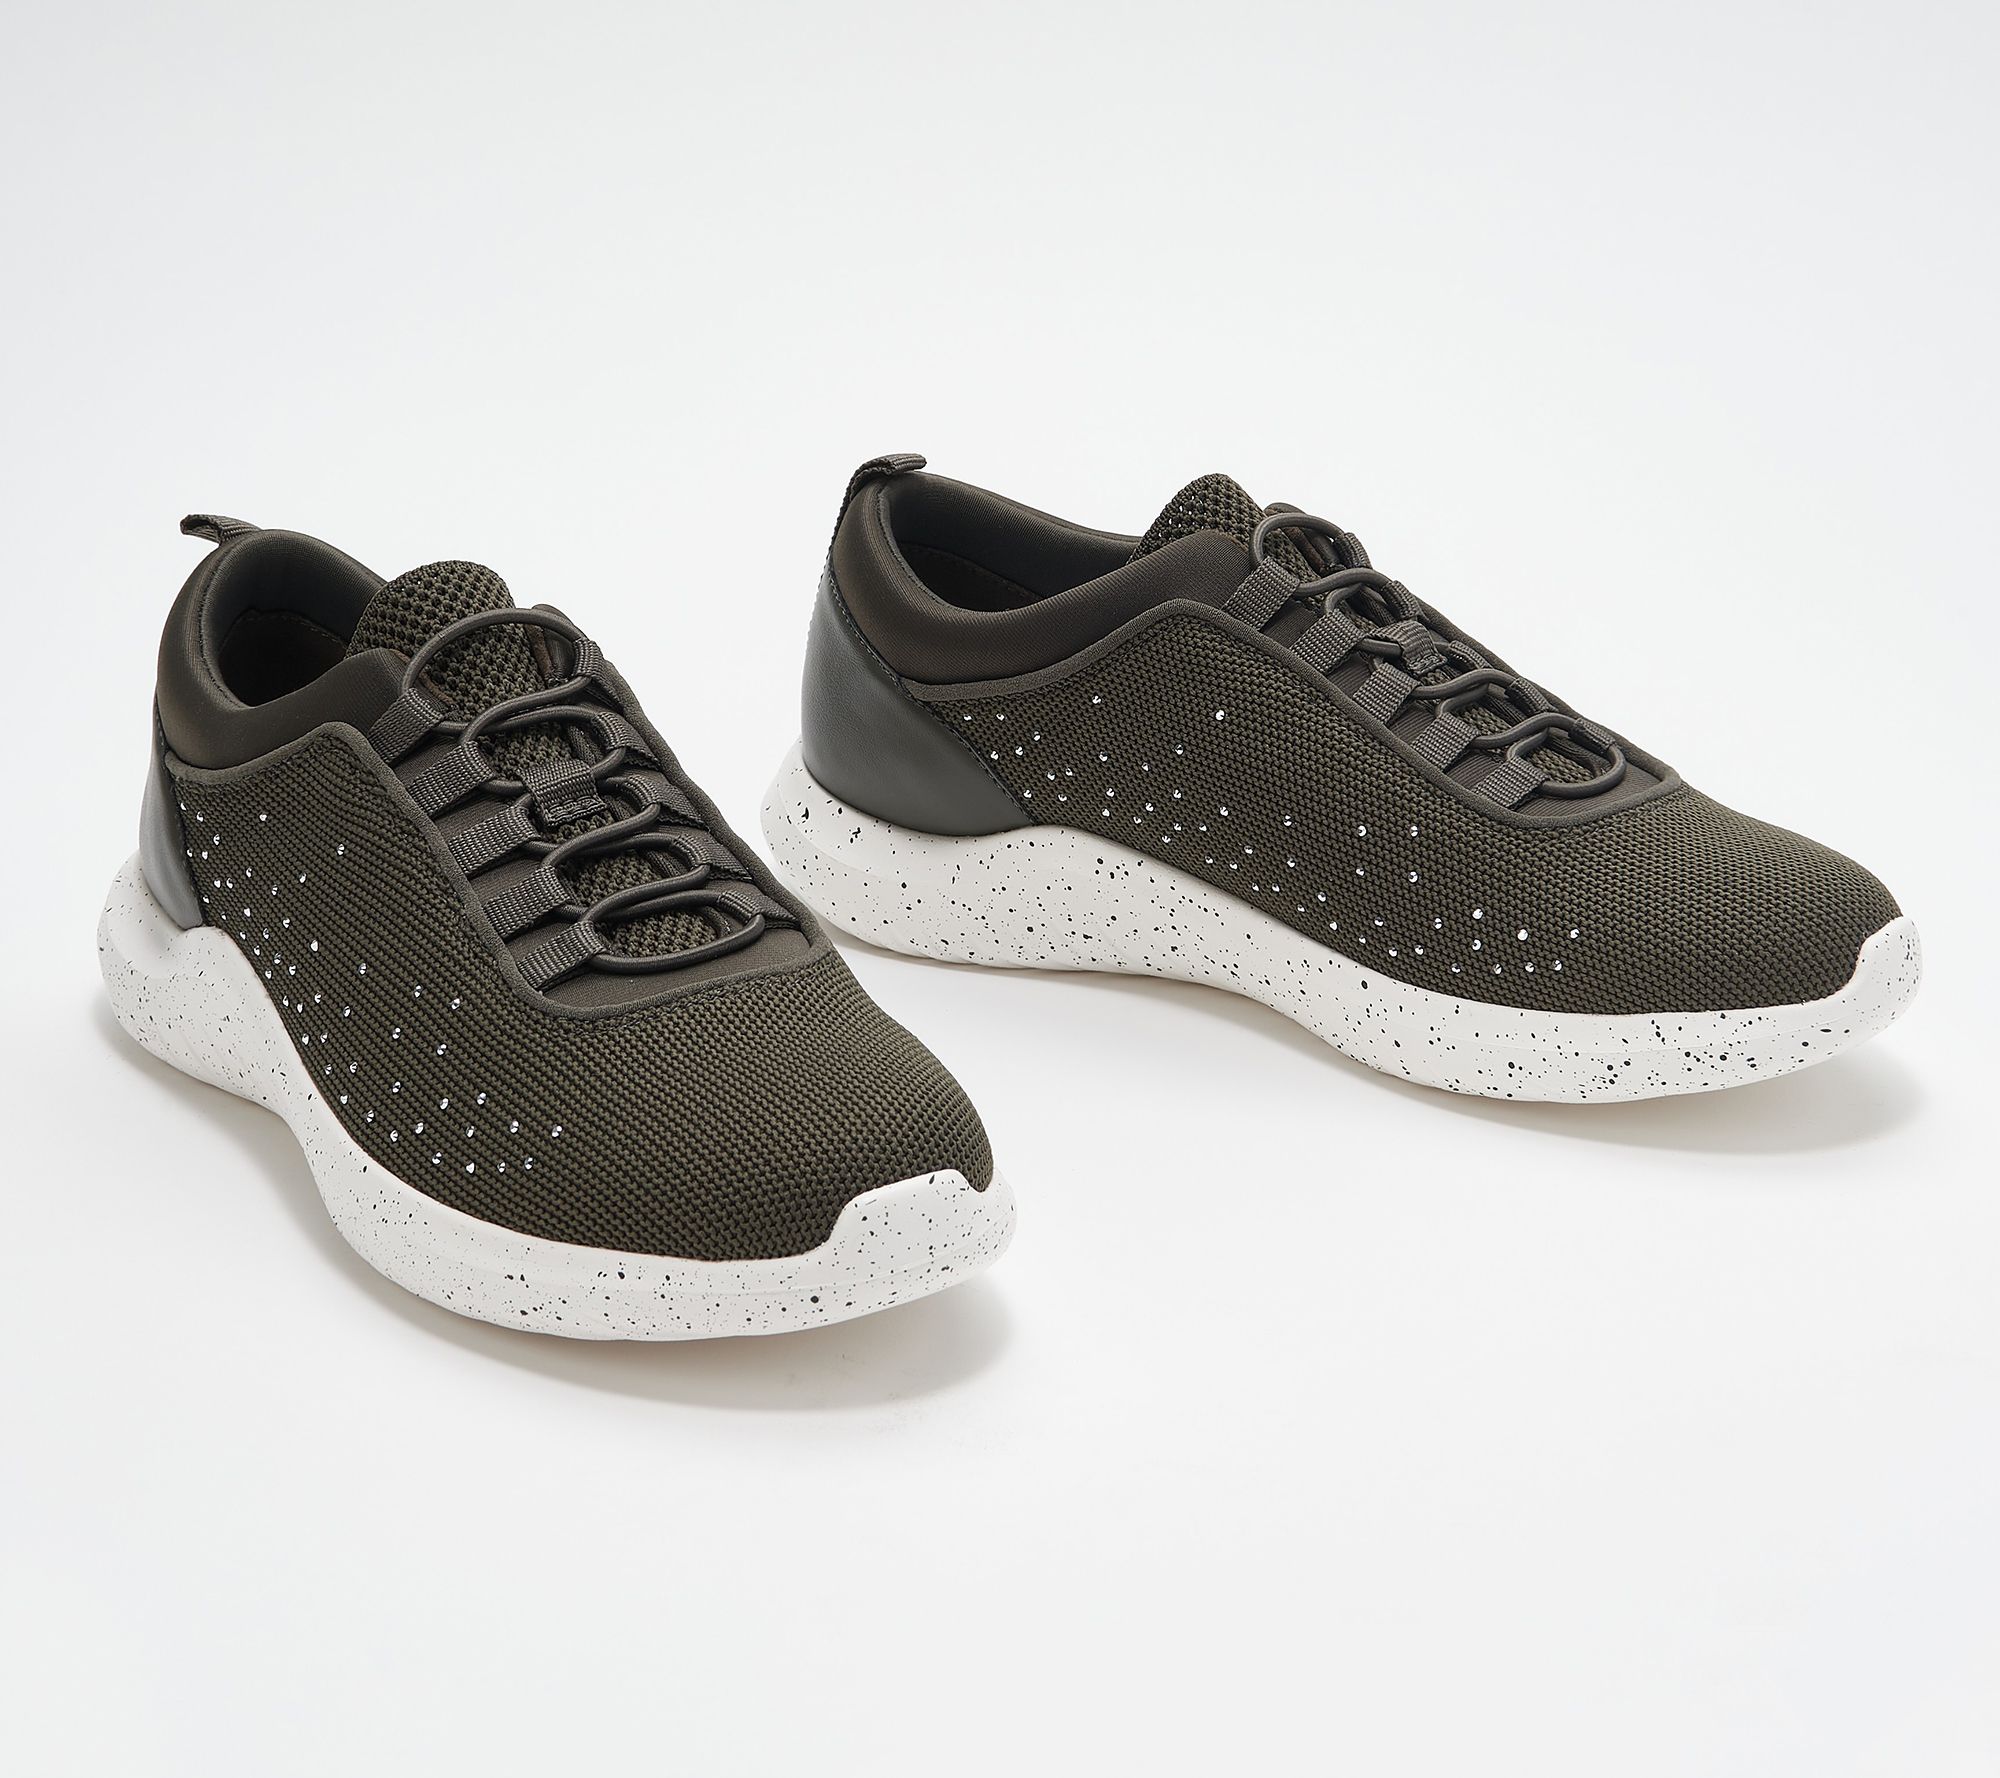 Clarks Cloudsteppers Embellished Bungee Sneakers - Nova Step - QVC.com